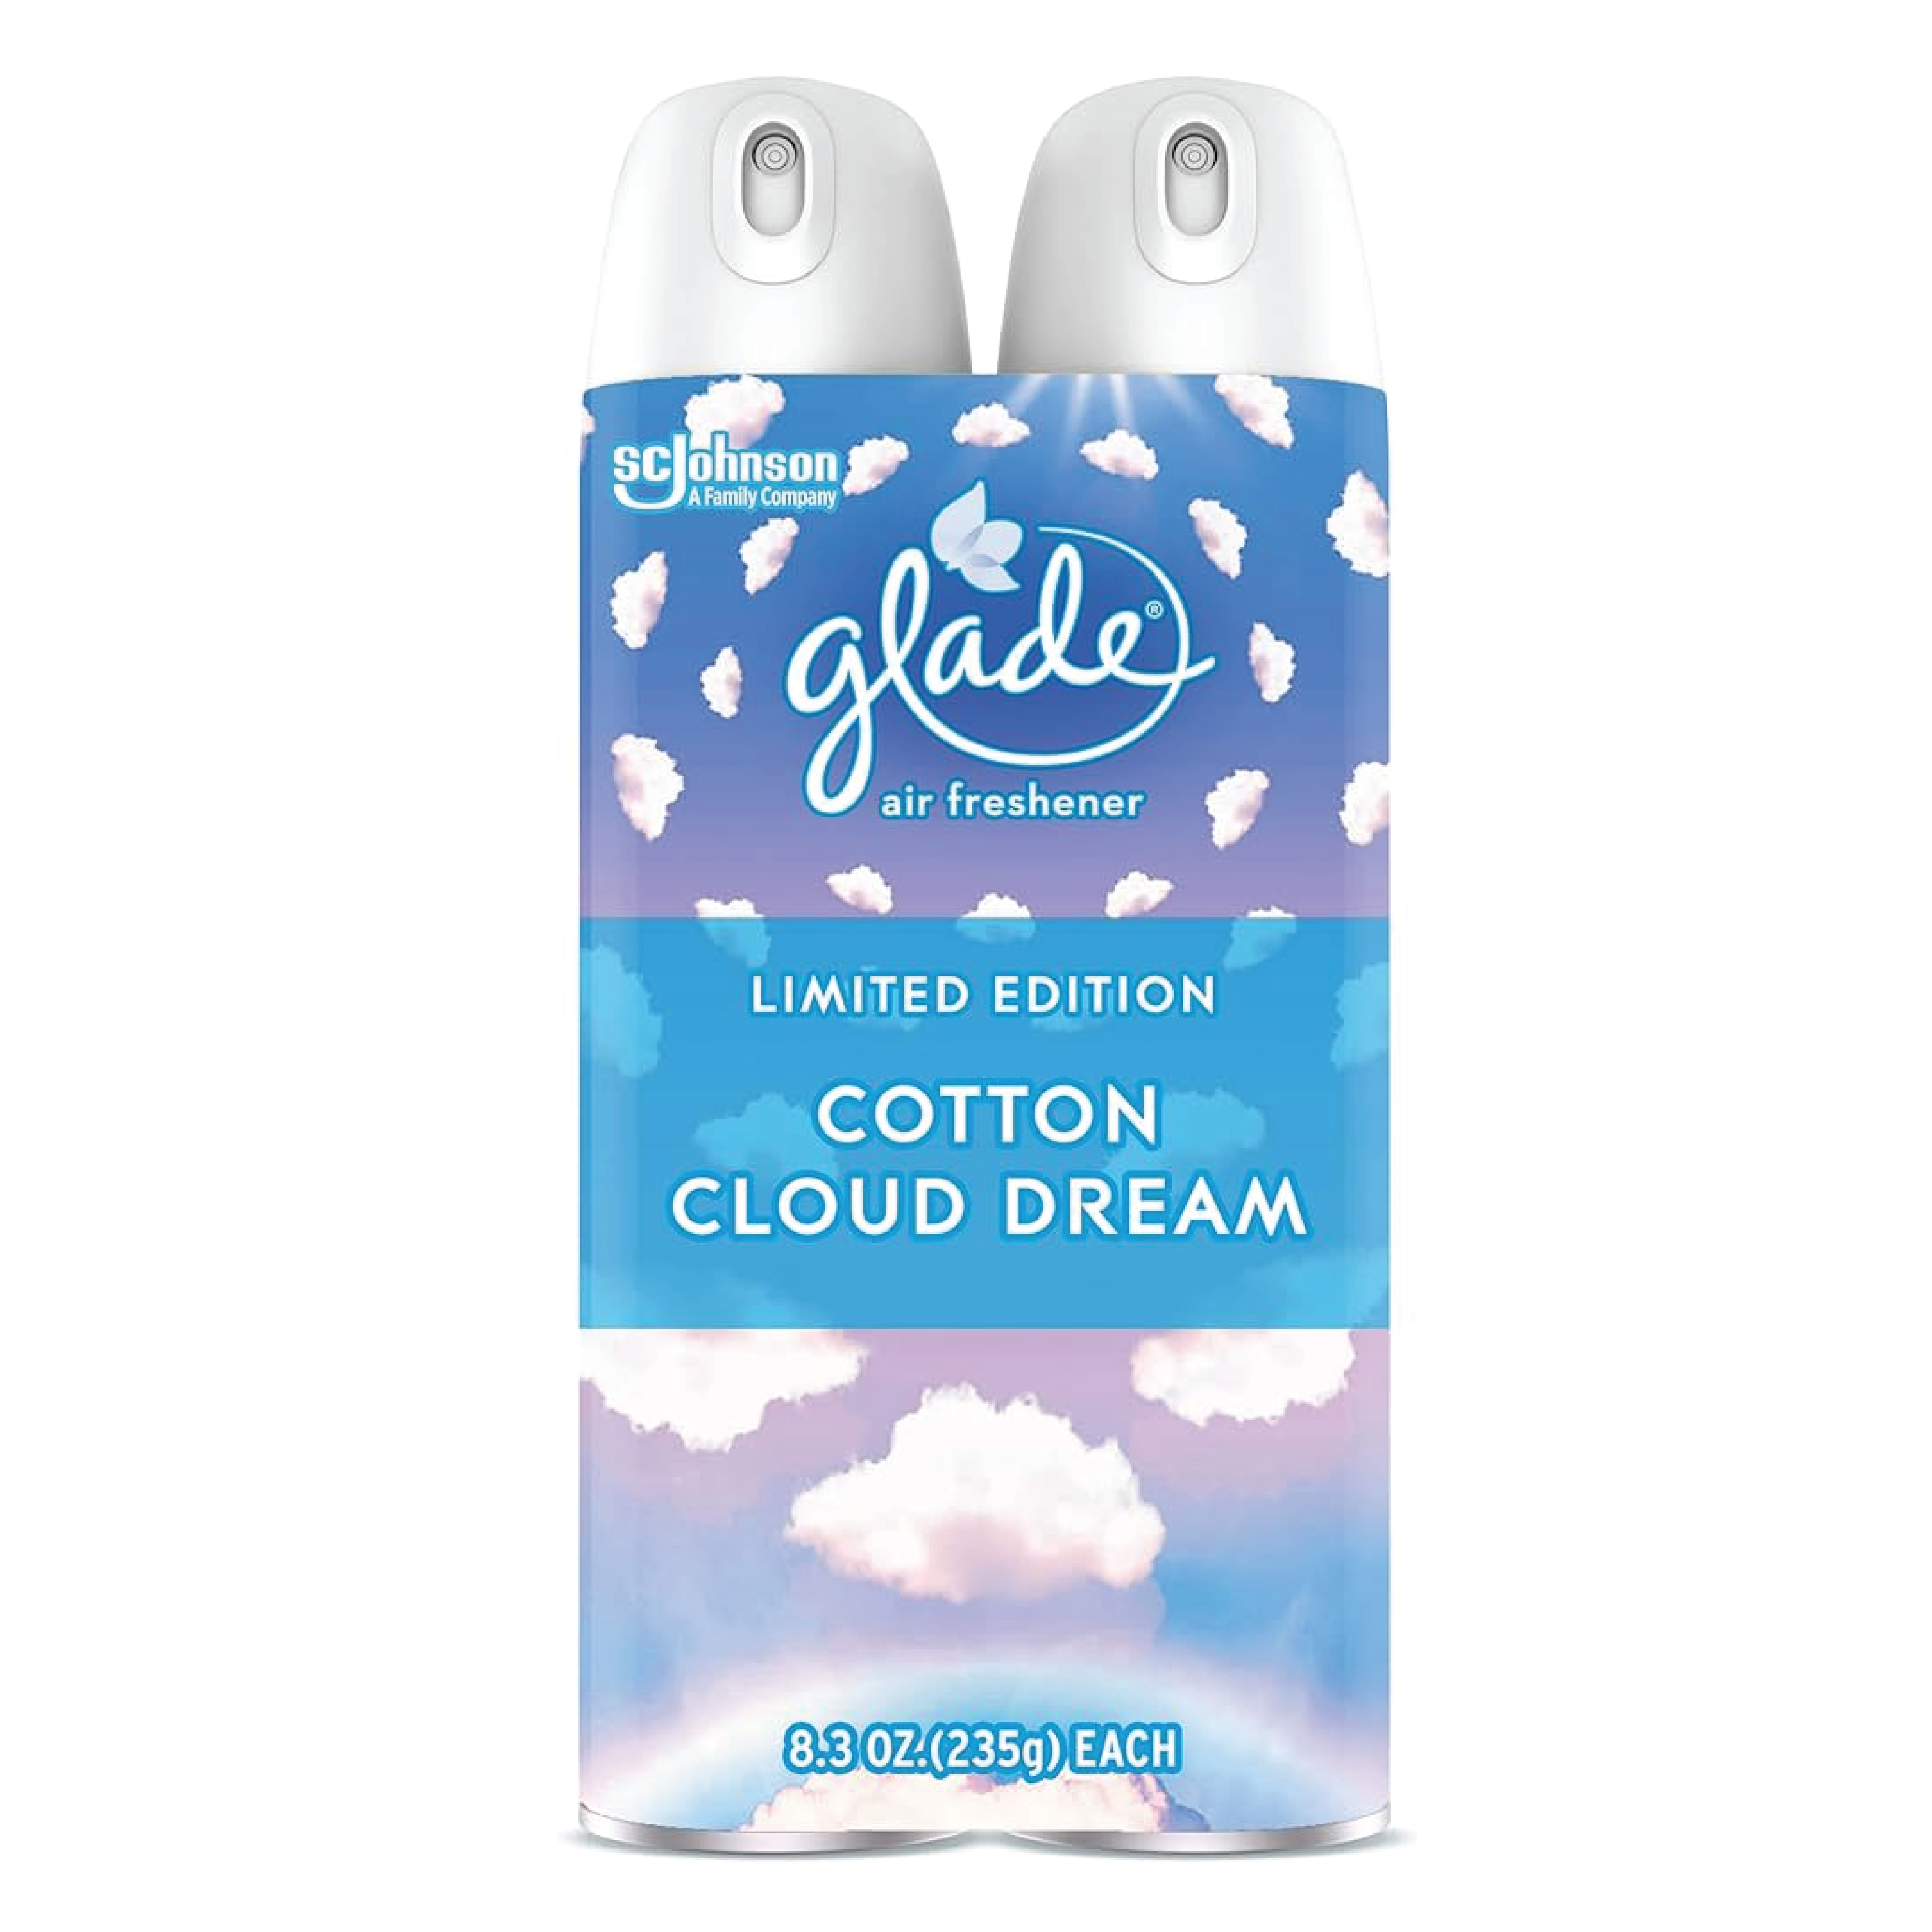 Glade Limited Edition Cotton Cloud Dream Air Freshener 2 Pack